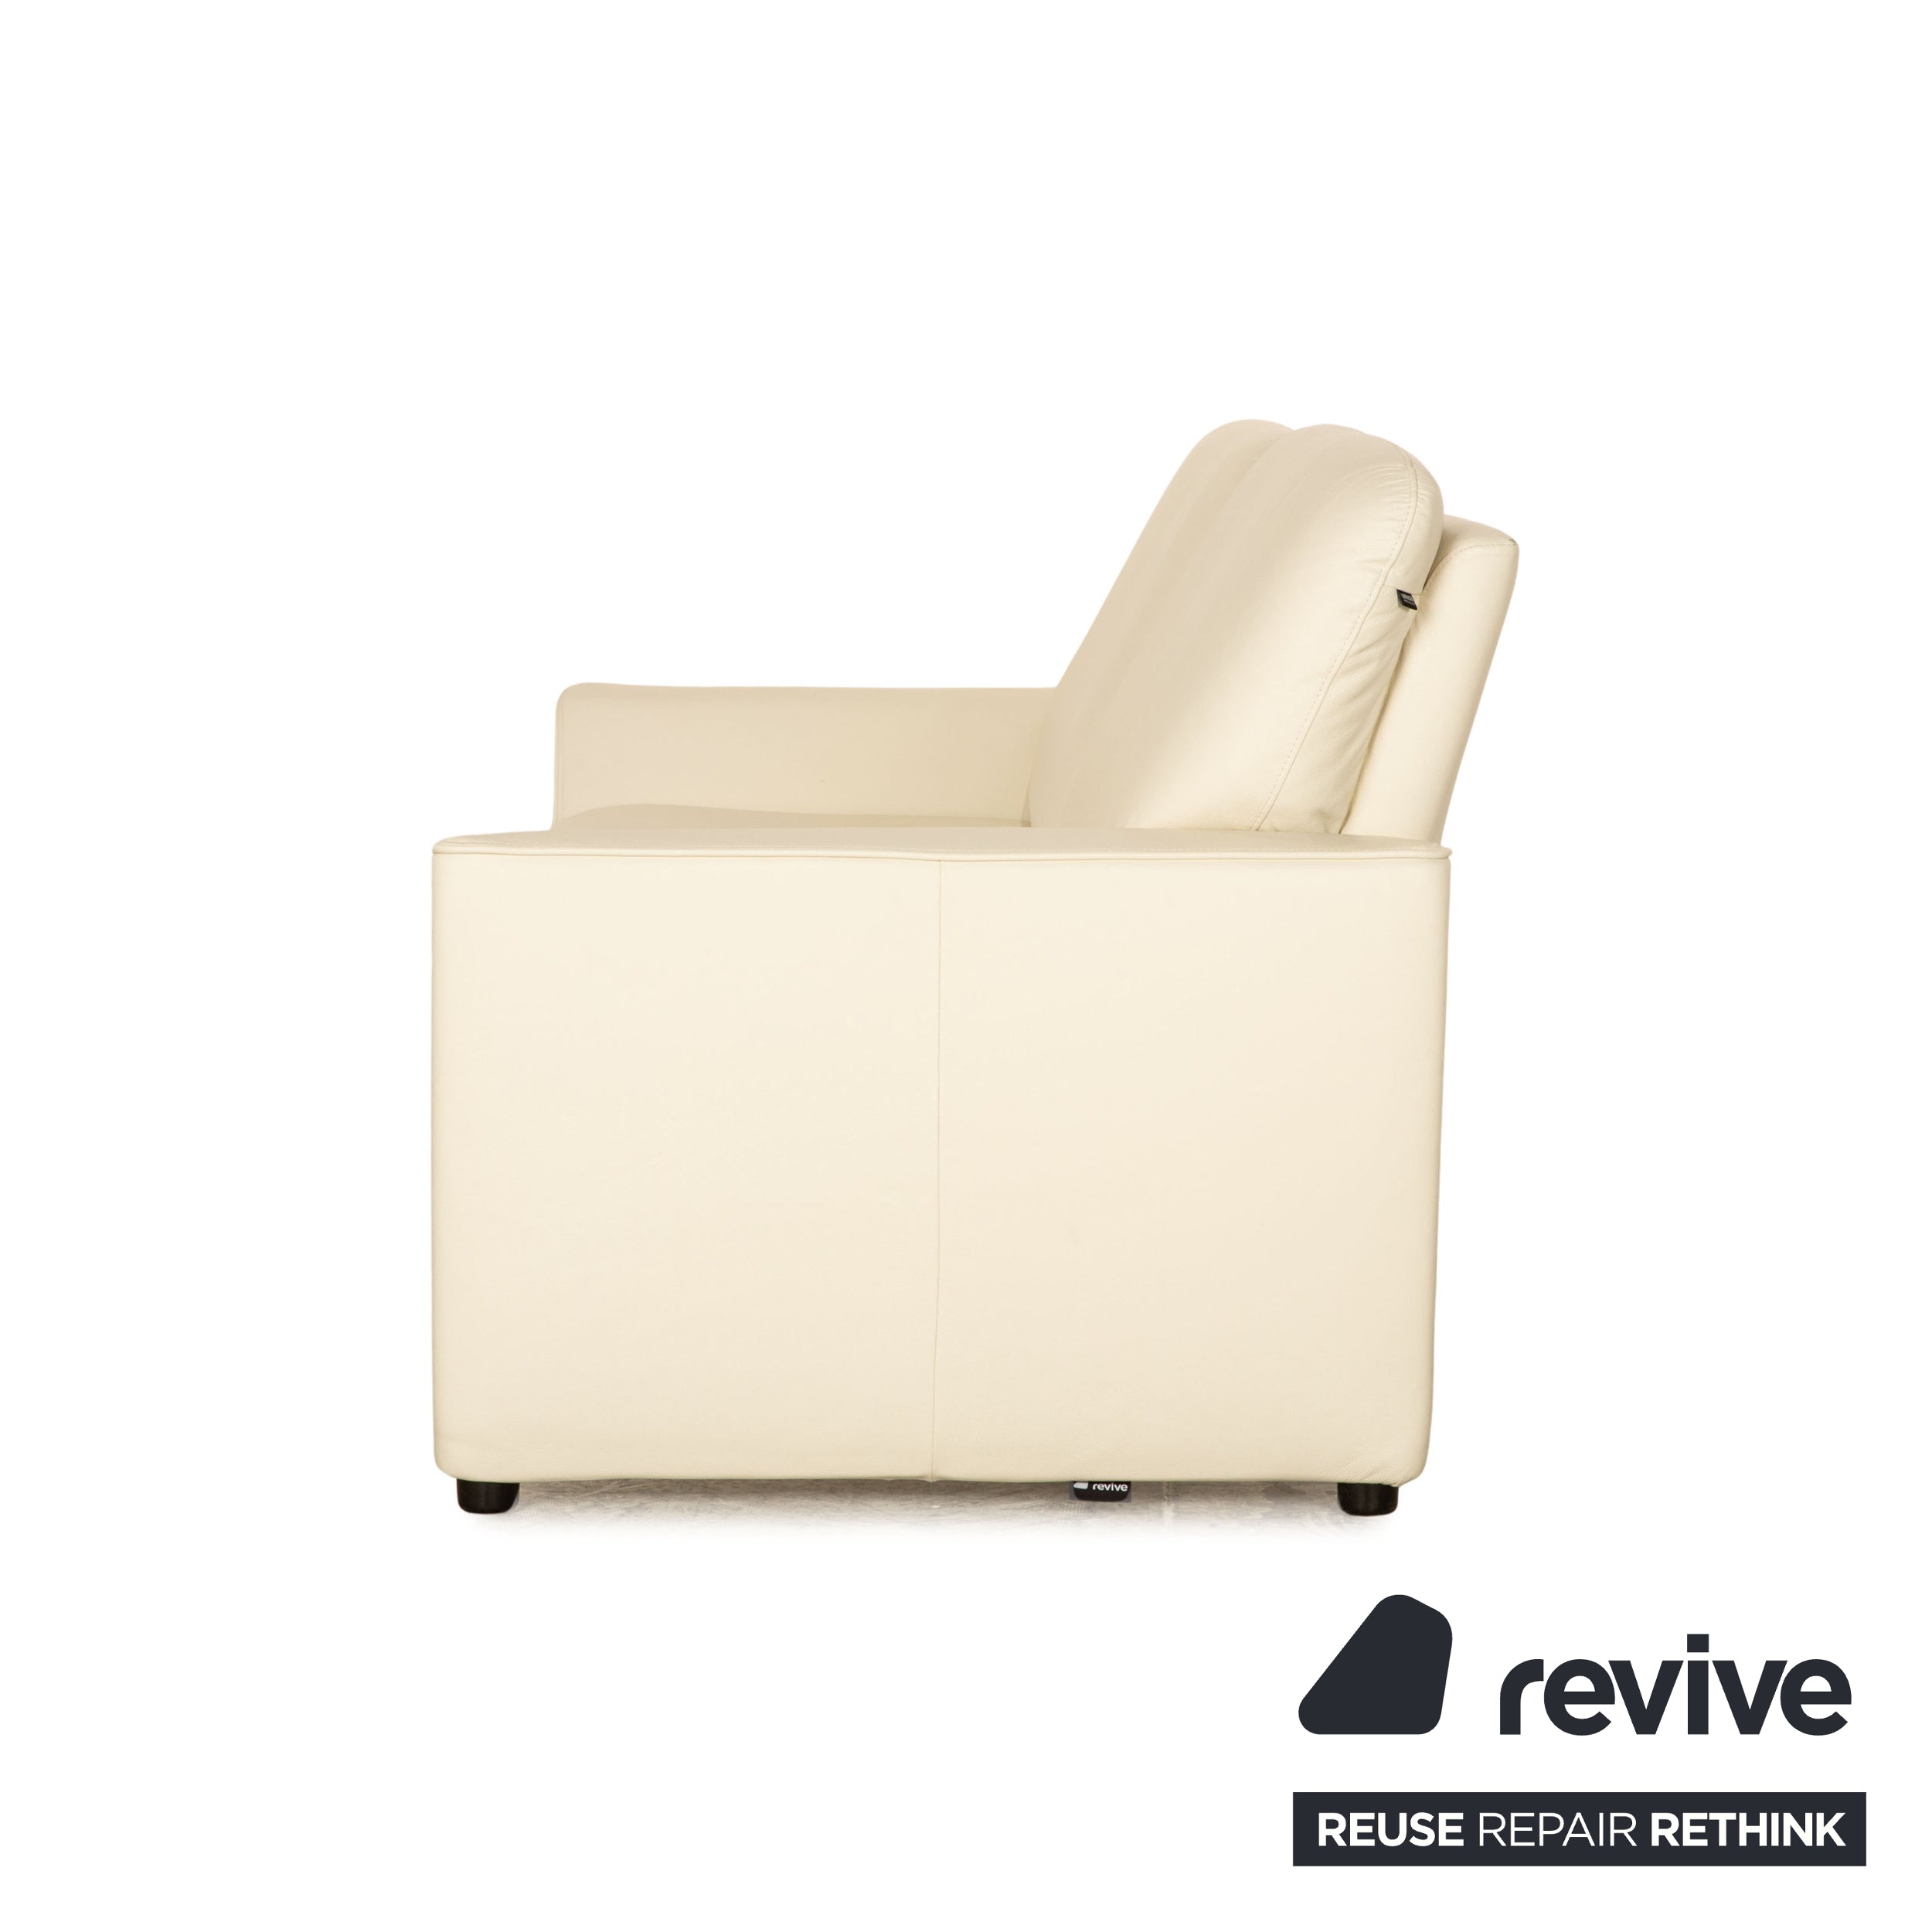 Laauser Corvus leather two-seater cream sofa couch